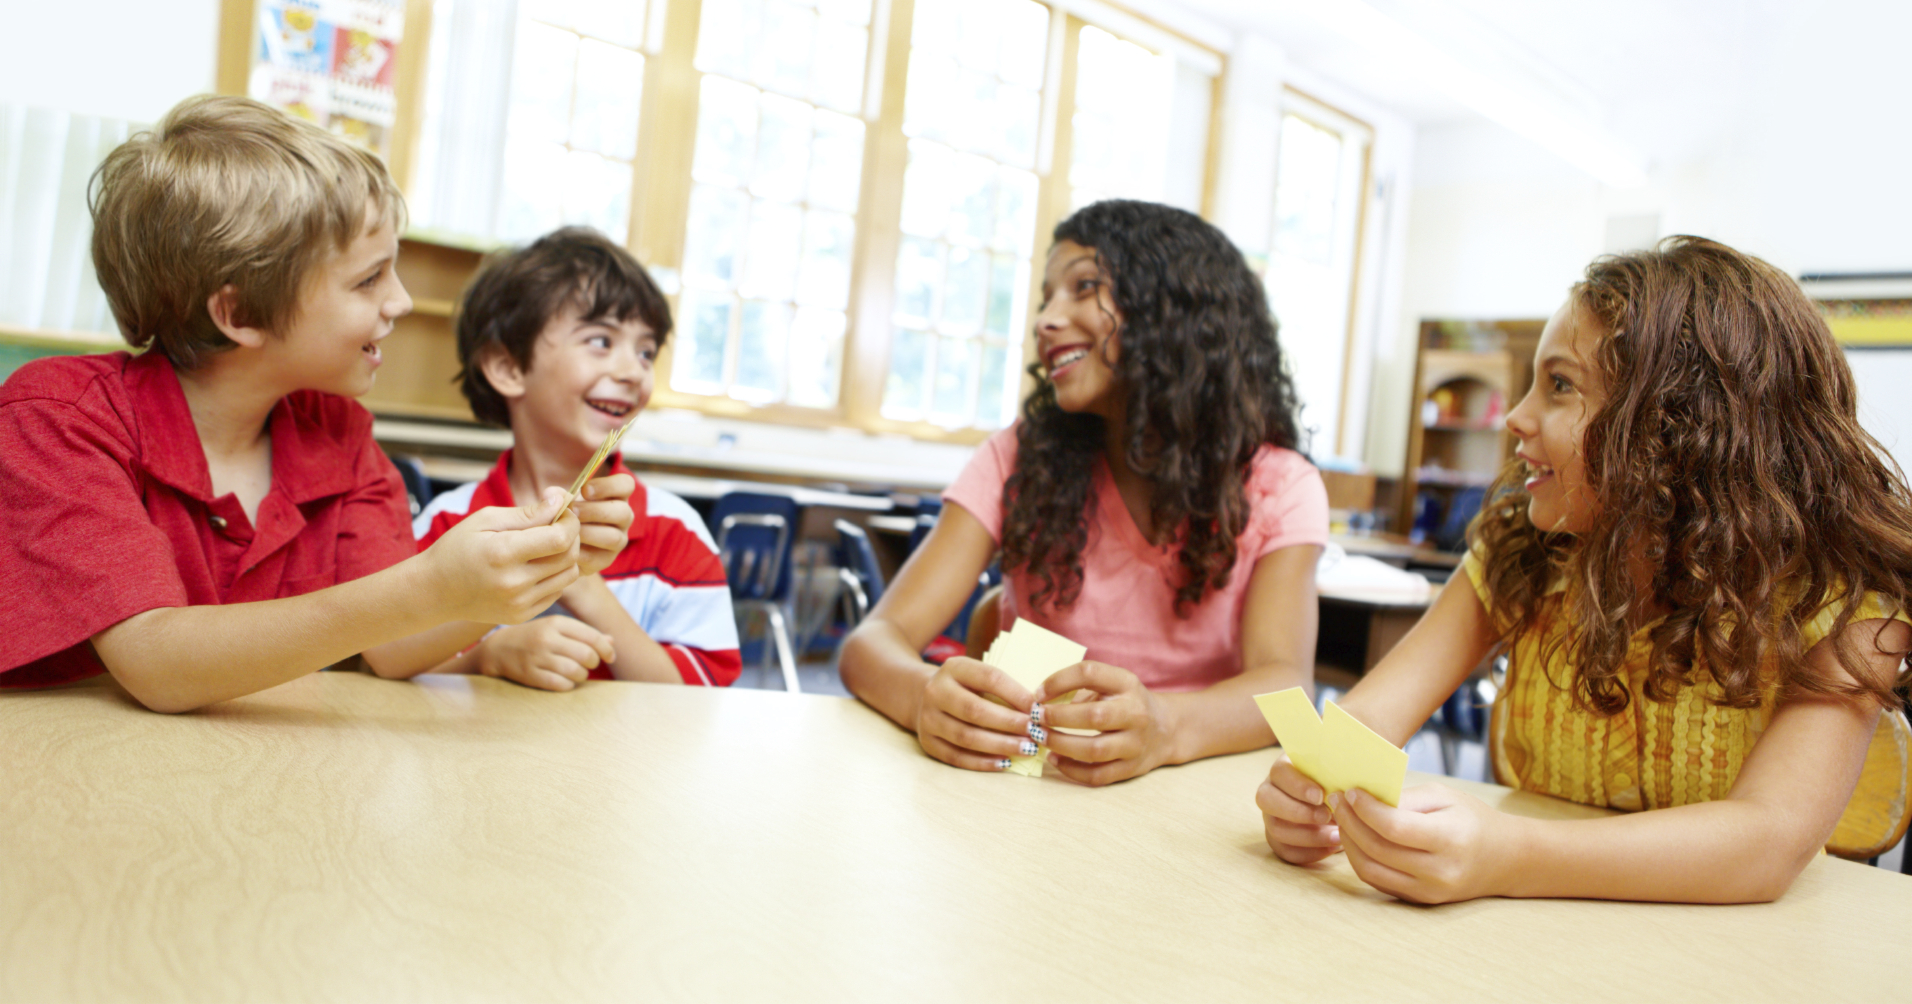 Image of Four young children playing cards in their classroom together